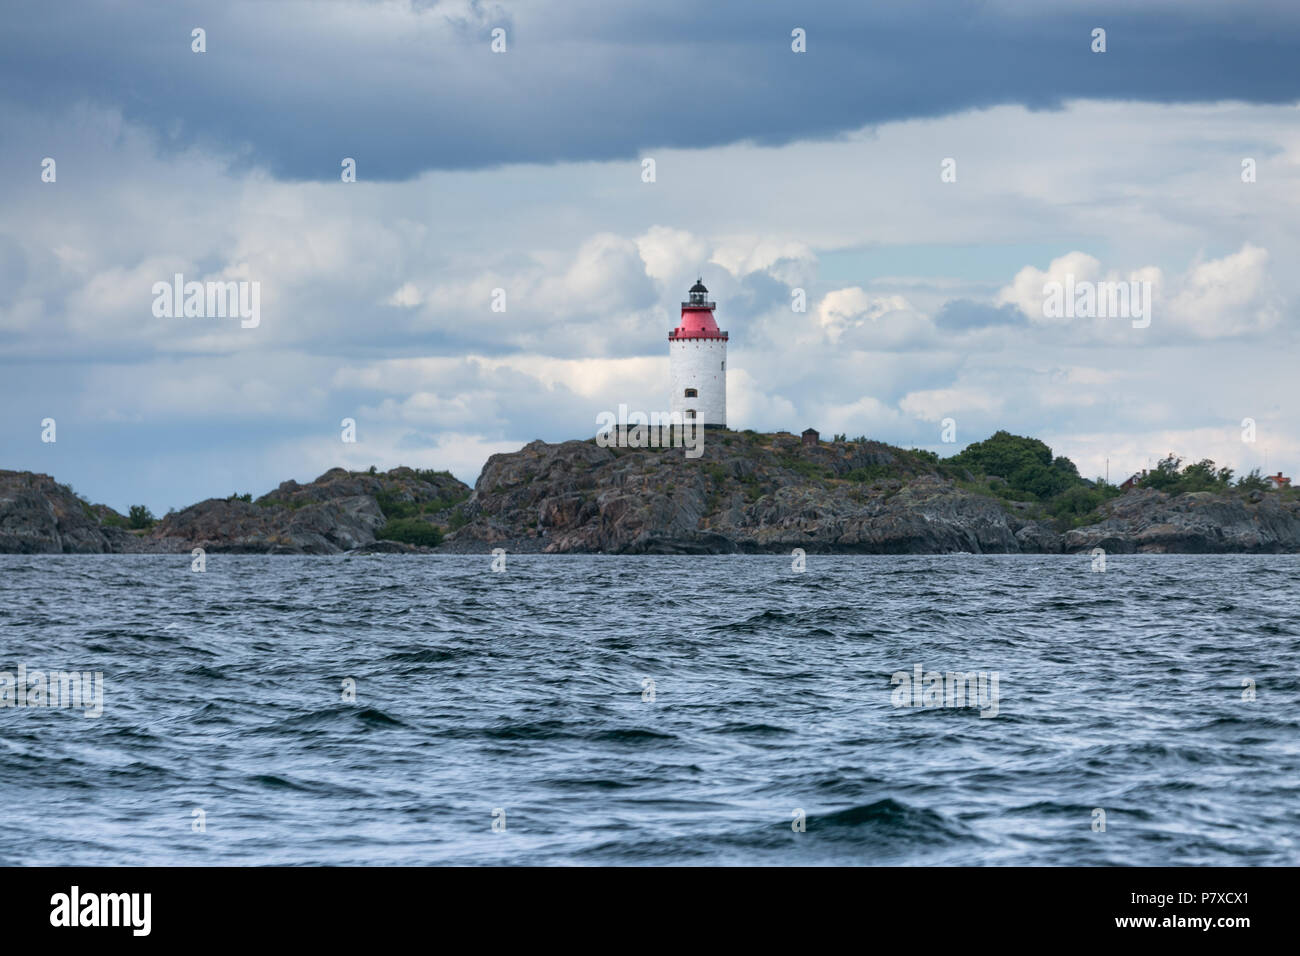 A lighthouse in the sea with dramatic sky. Stock Photo